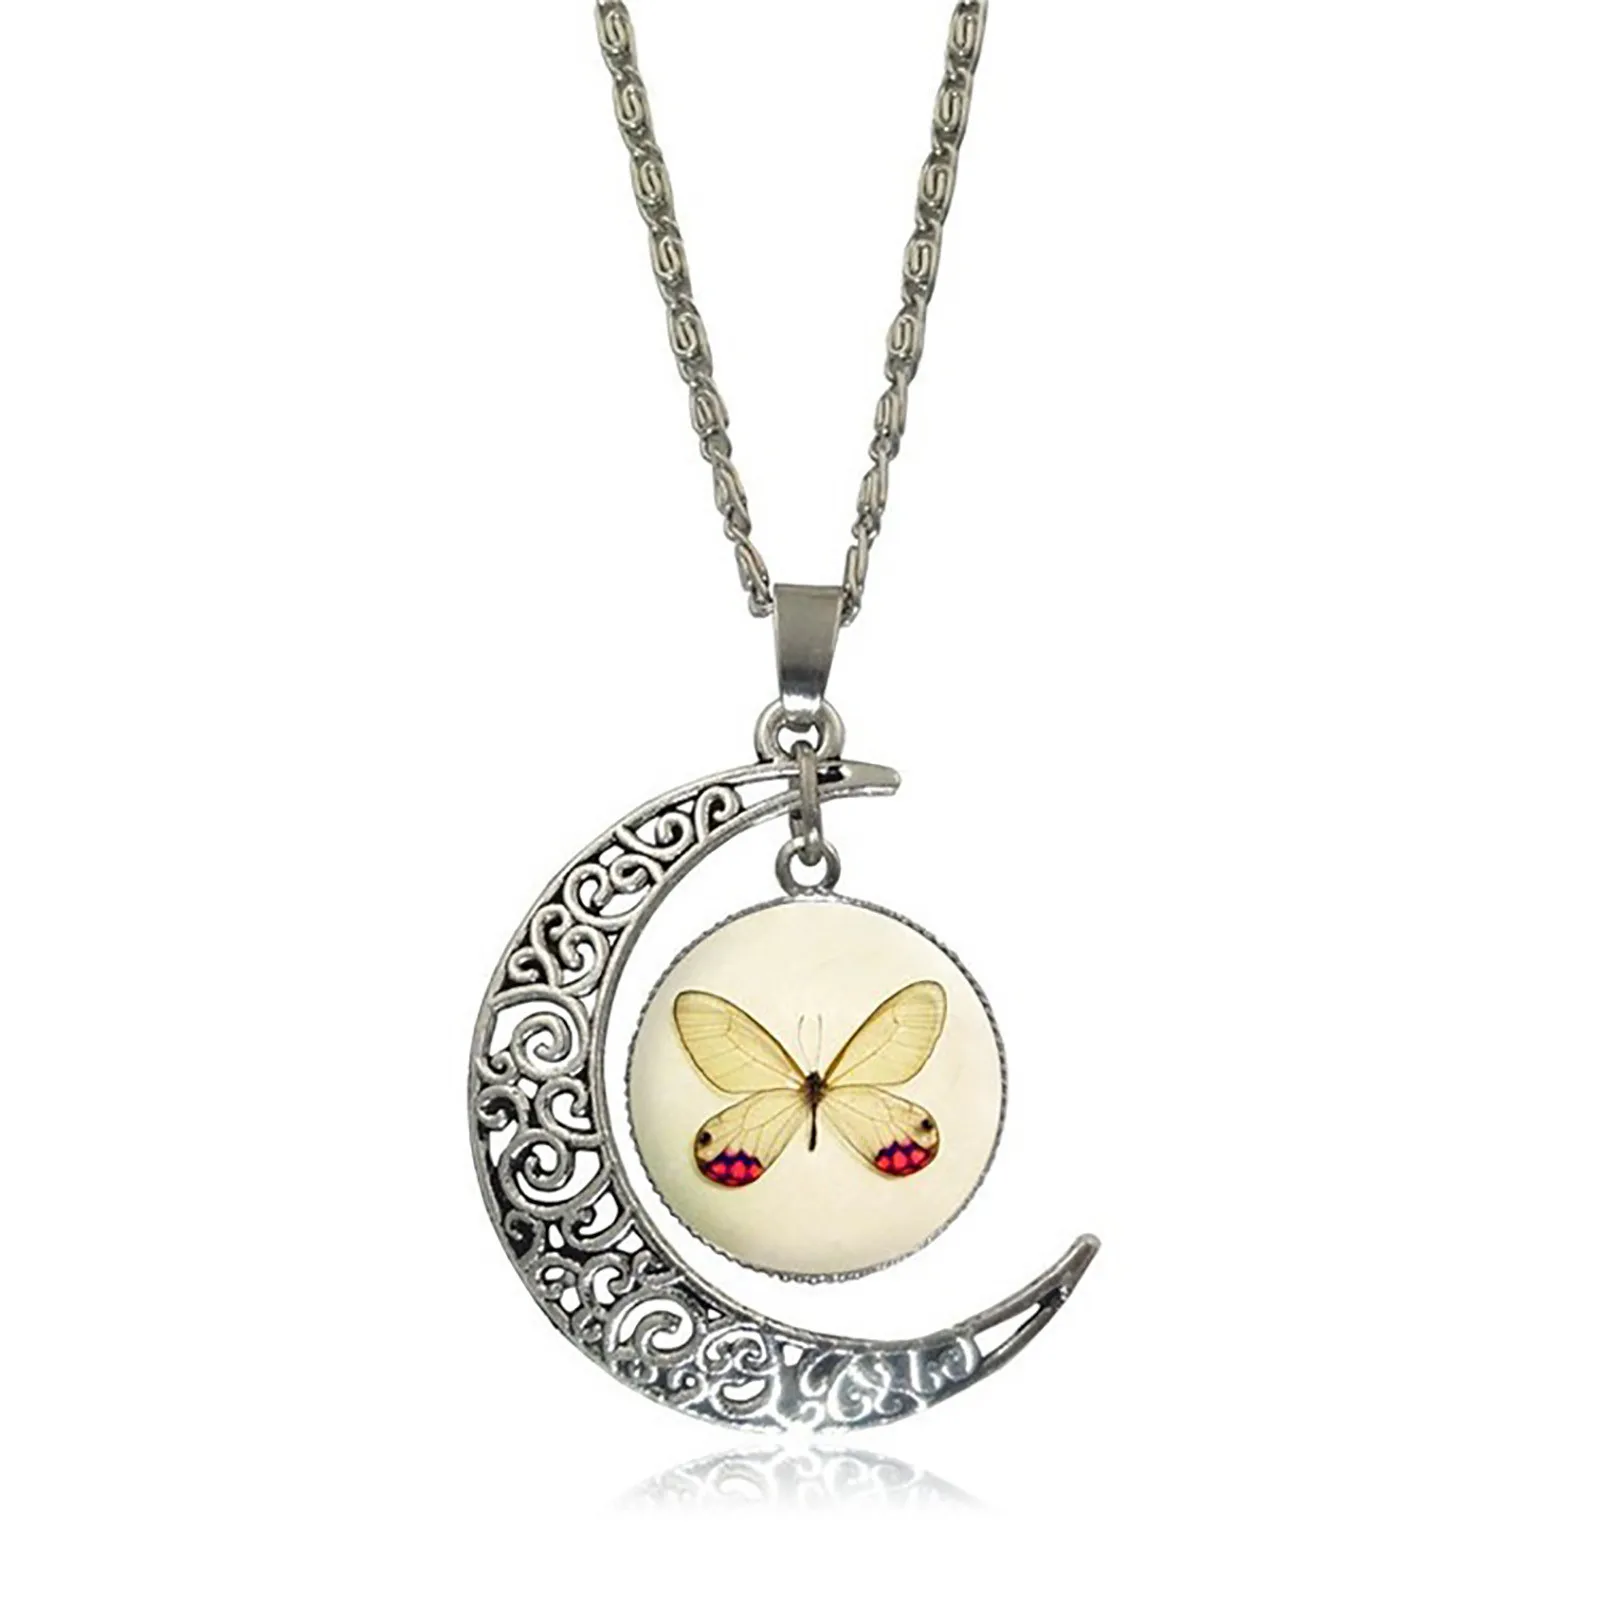 Time Friend Necklace Gemstone Necklace Moon Friend Wearing Female Necklaces & Pendants Fake Diamond Necklaces for Women